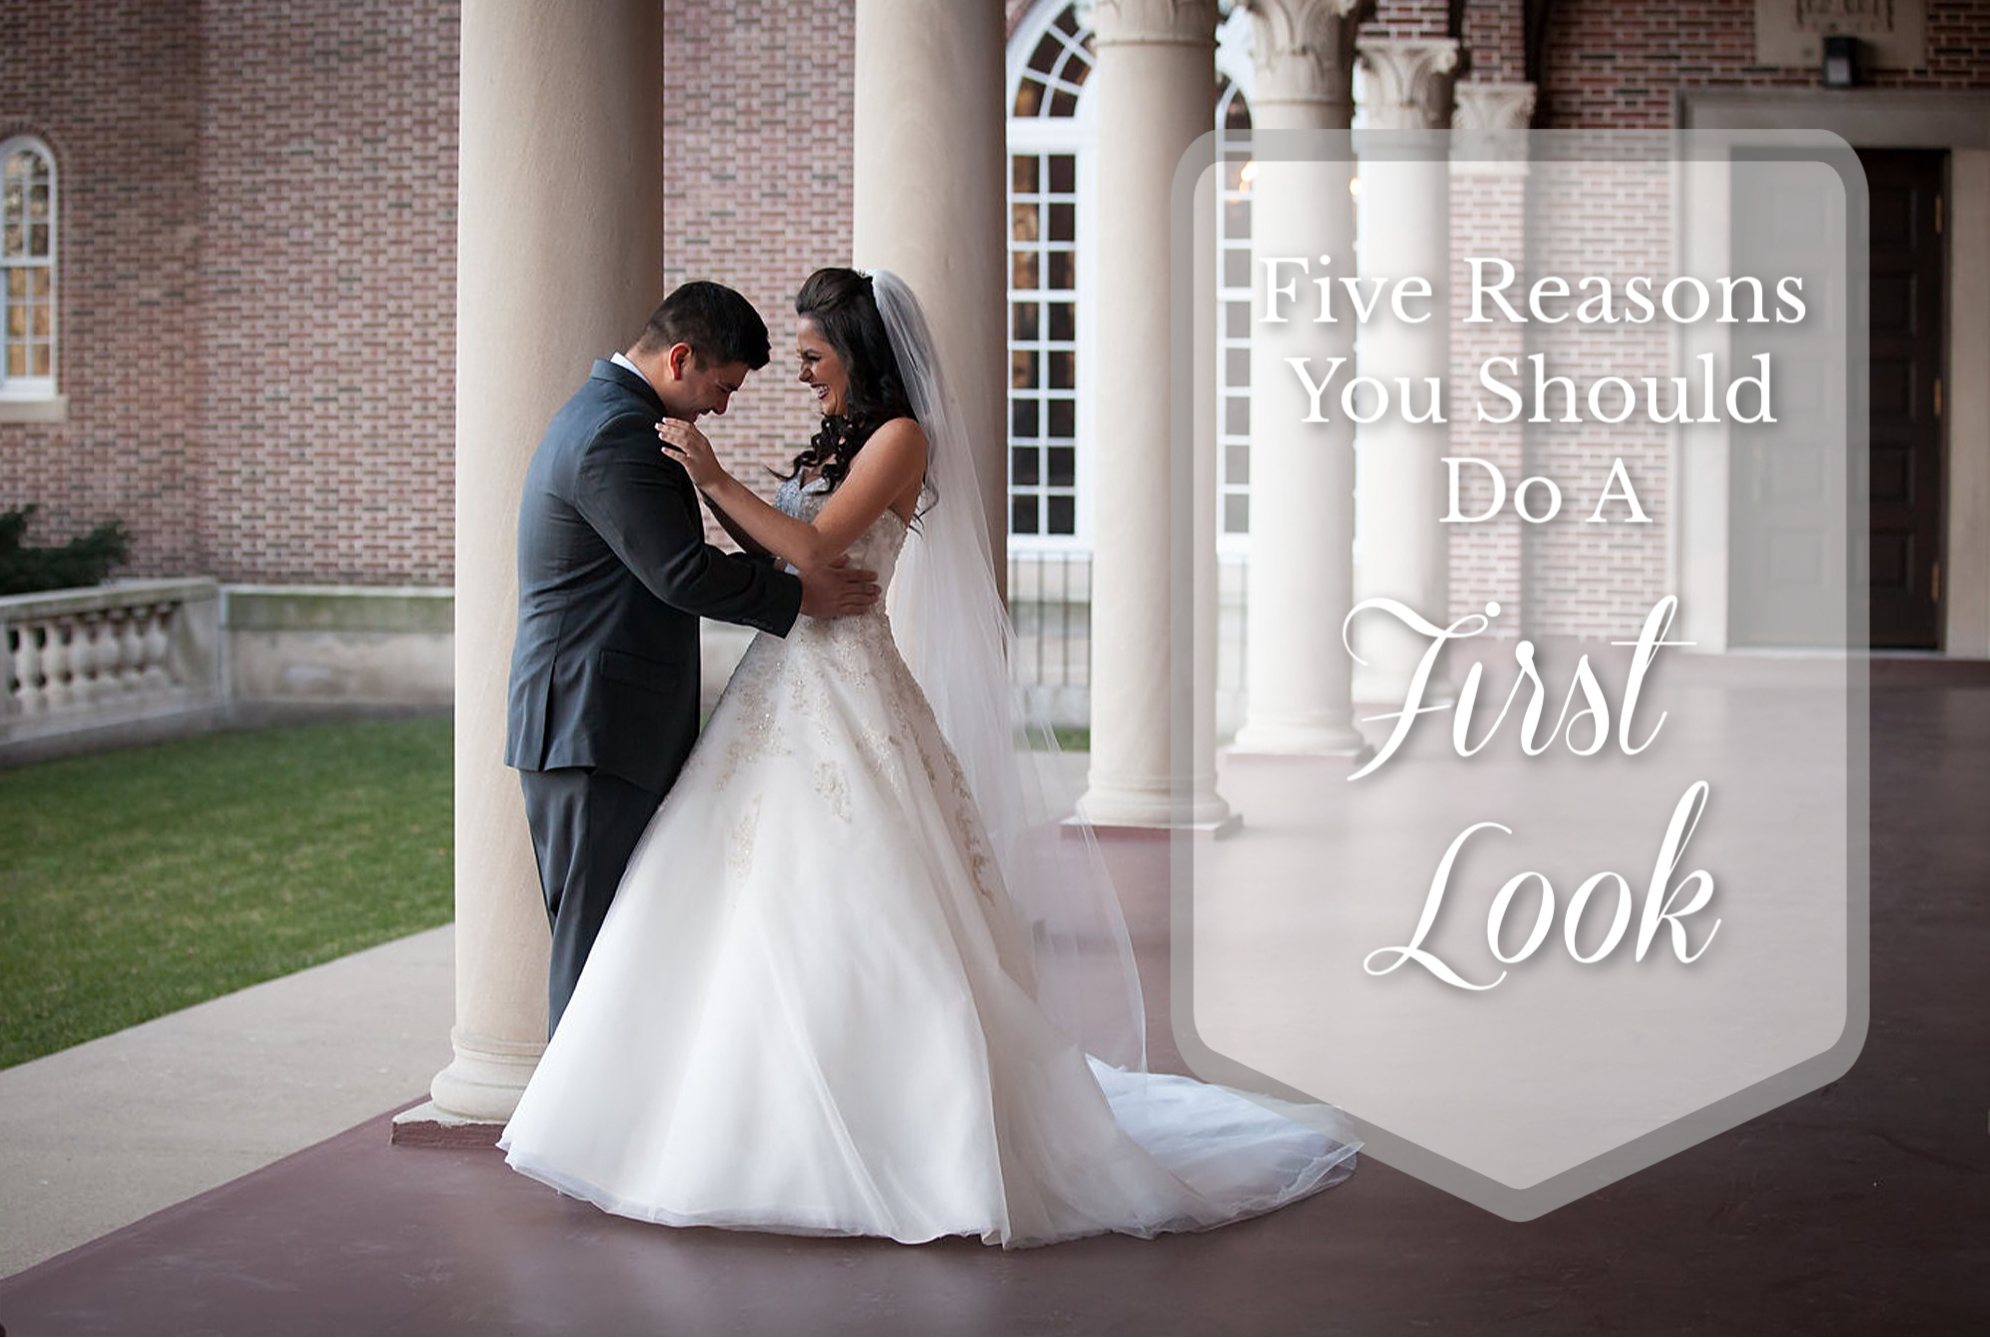 Five Reasons You Should Do a First Look by Heather O'Steen Photography